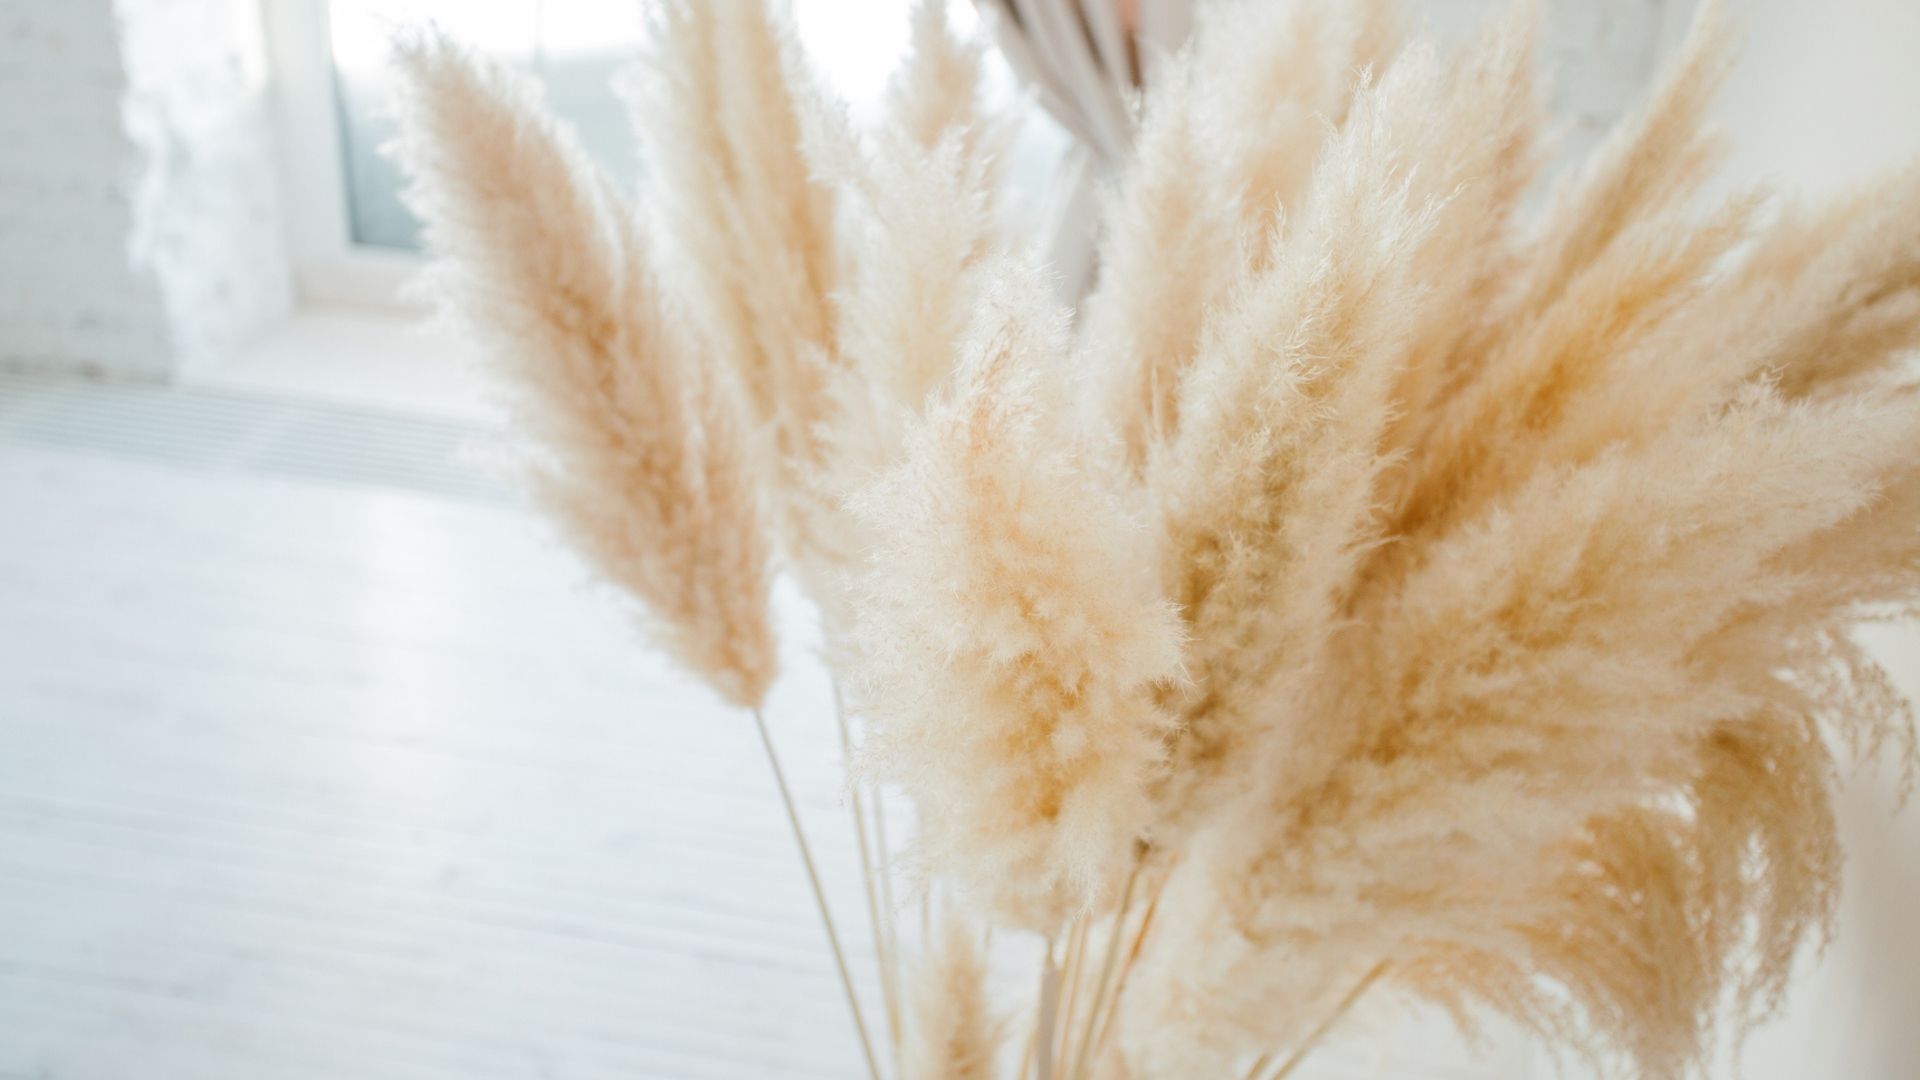 A bunch of pampas grass in a living room with a white wooden floor.